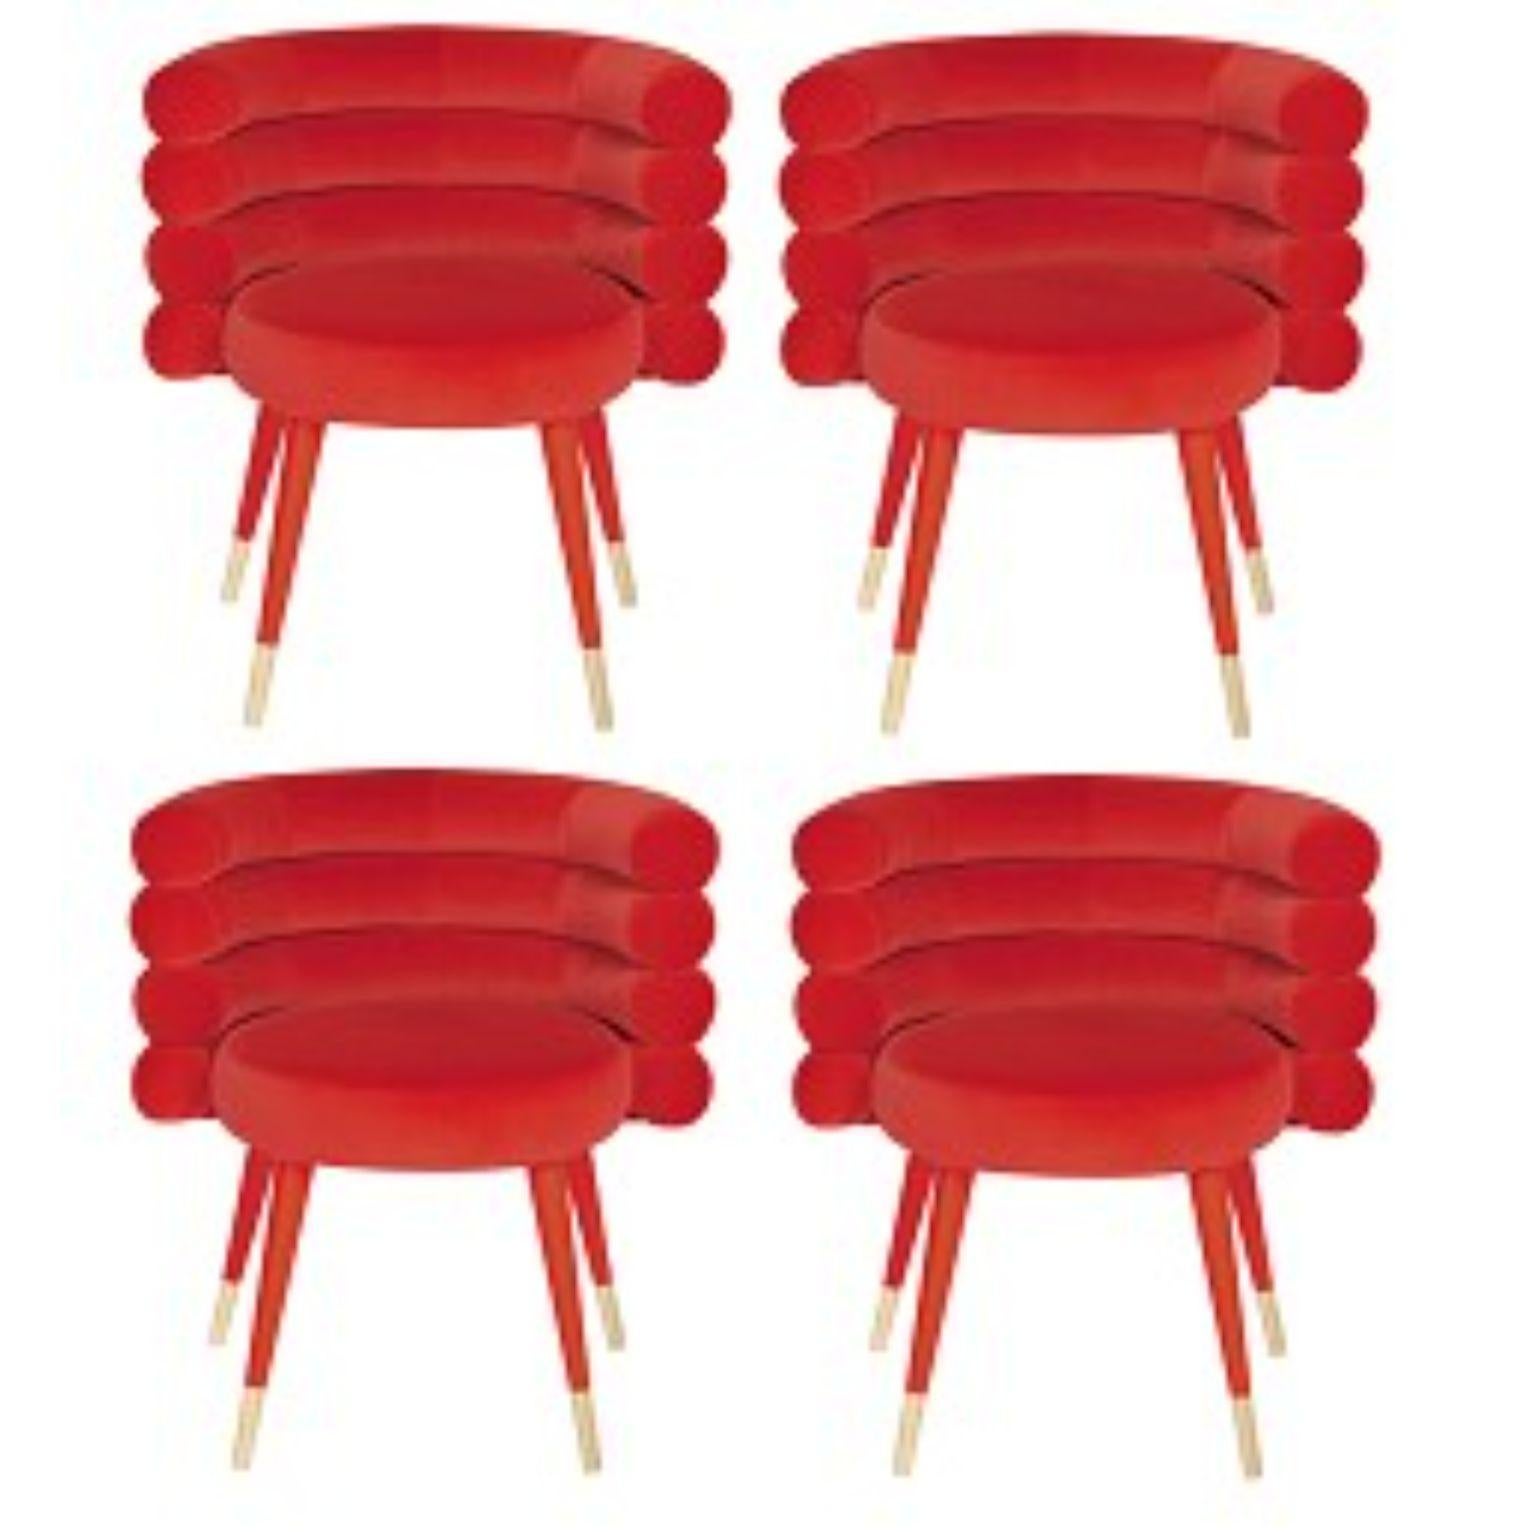 Set of 4 red marshmallow dining chairs by Royal Stranger.
Dimensions: 71 x 61 x H74 cm. Seat height: 52 cm, seat depth: 48 cm.
Materials: velvet upholstery and brass.
Available in: mint green, light pink, royal green, and royal red.

Royal